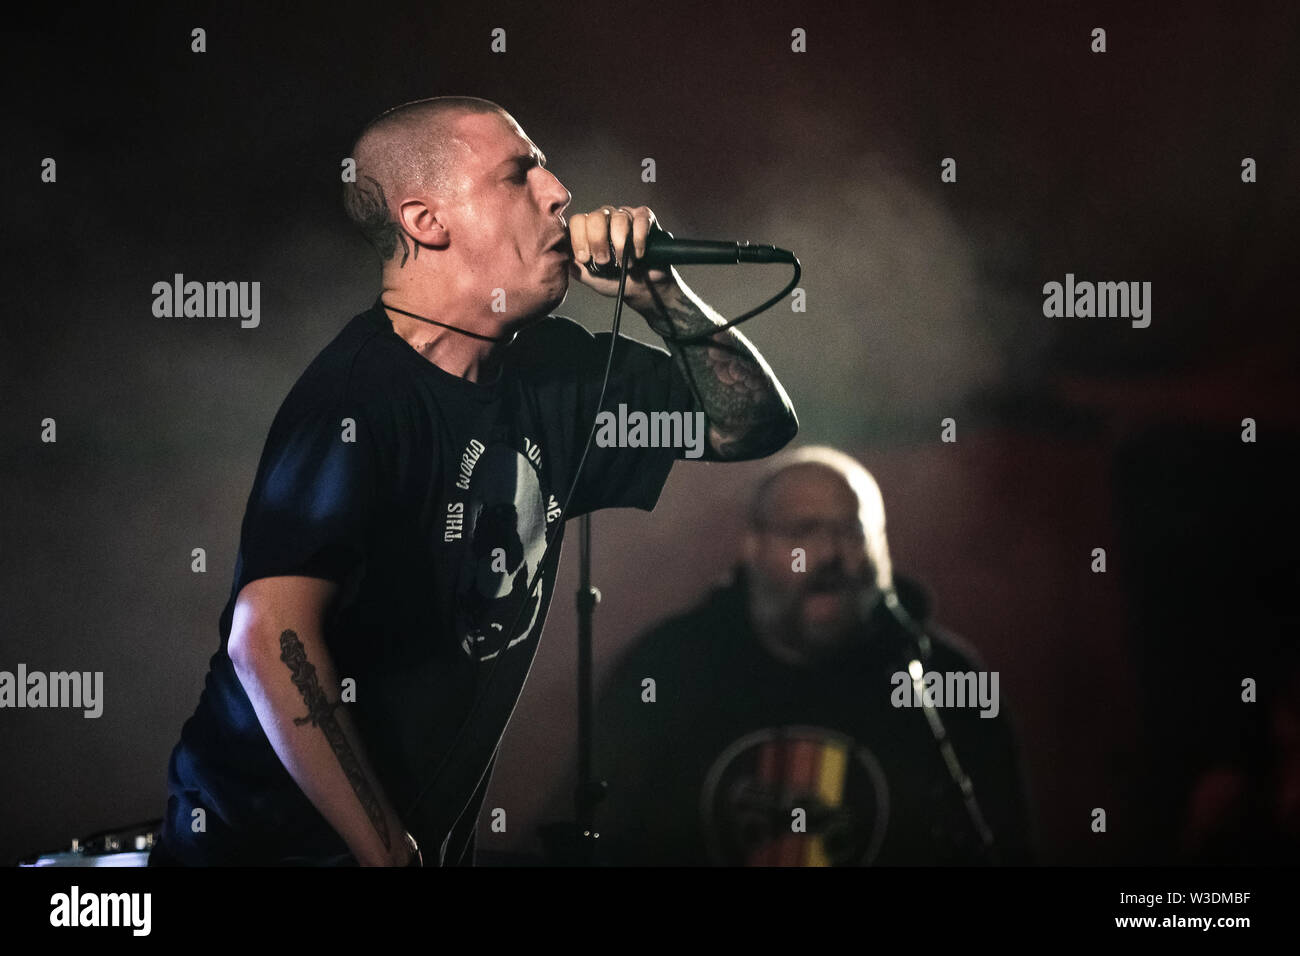 Roskilde, Denmark. July 05th, 2019. The two American metal bands Full of  Hell and The Body perform a live concert together during the Danish music  festival Roskilde Festival 2019. Here vocalist Dylan